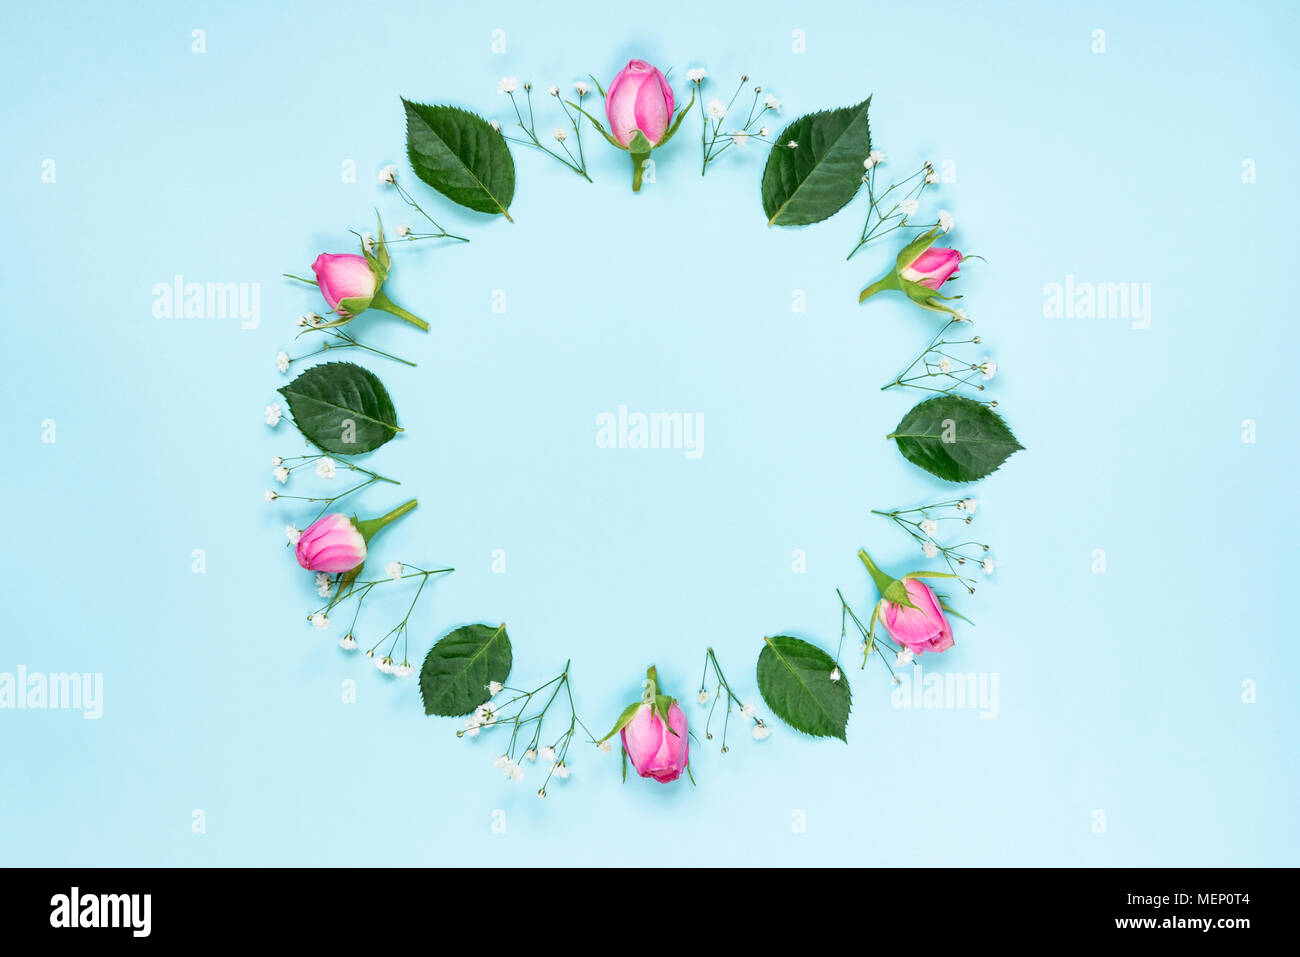 Top view of pink roses and green leaves wreath over blue background. Abstract floral background. Stock Photo